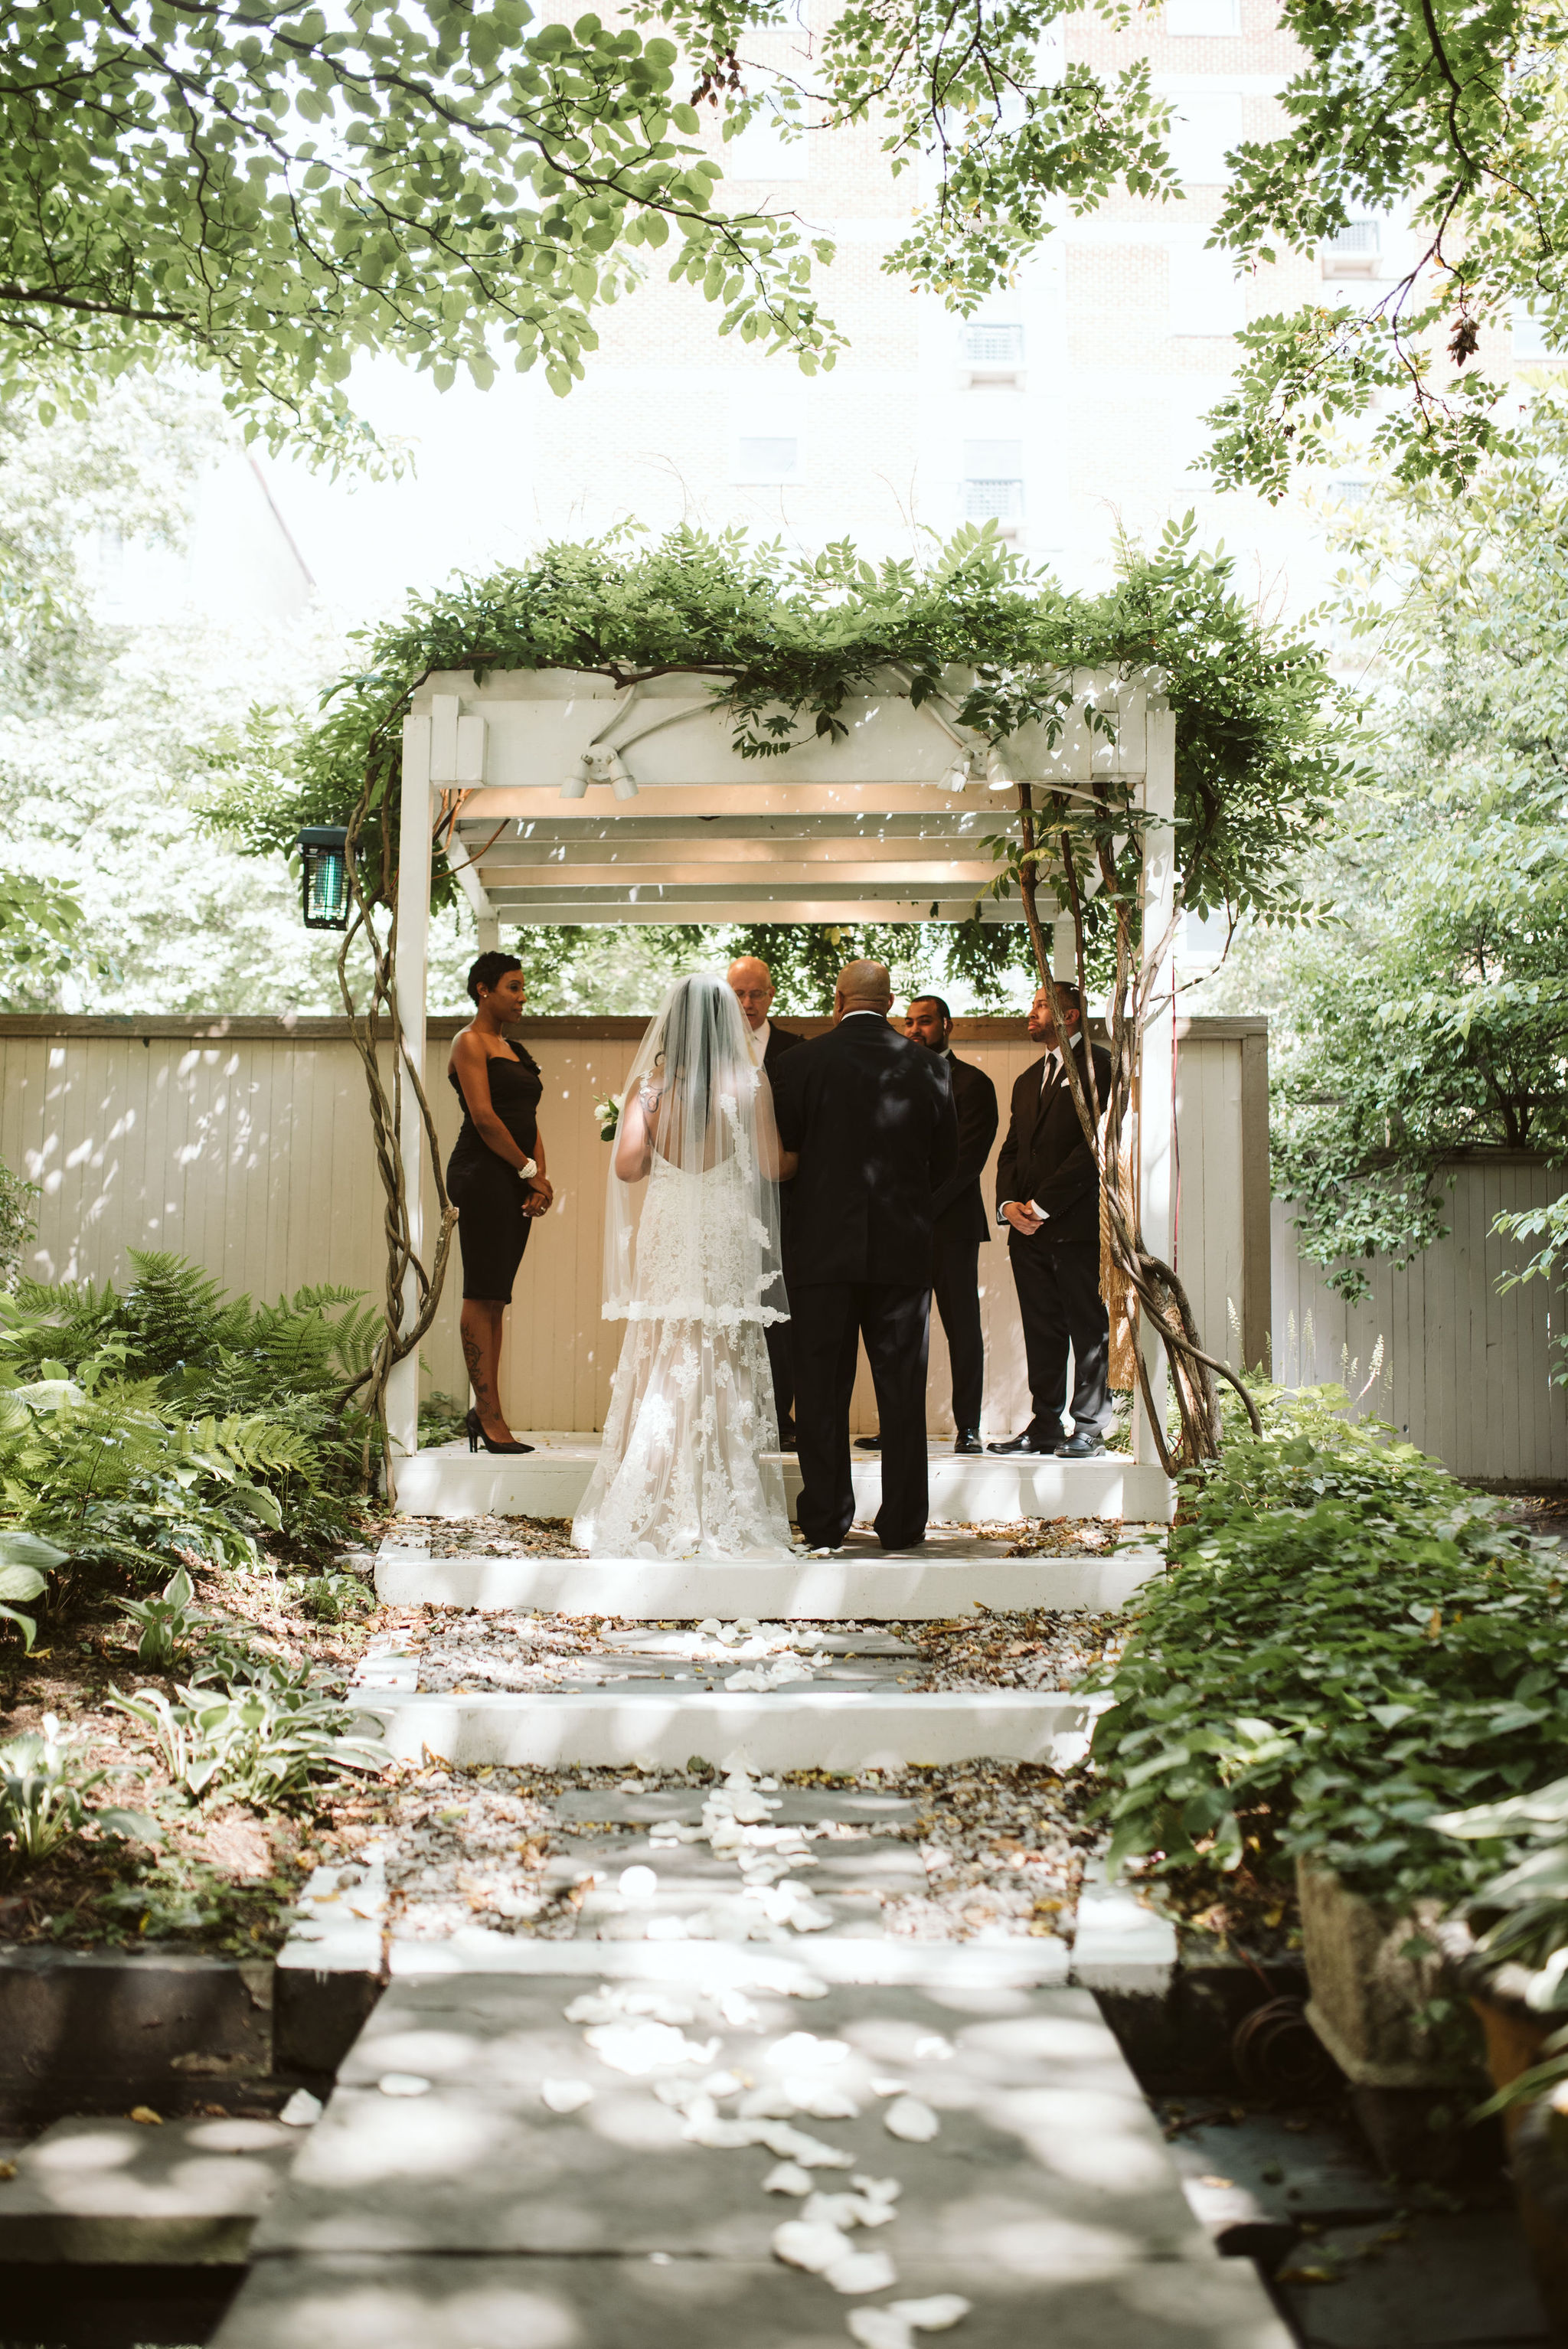  Baltimore, Maryland Wedding Photographer, Mount Vernon, Chase Court, Classic, Outdoor Ceremony, Garden, Romantic, Bride and Groom Standing at Altar 